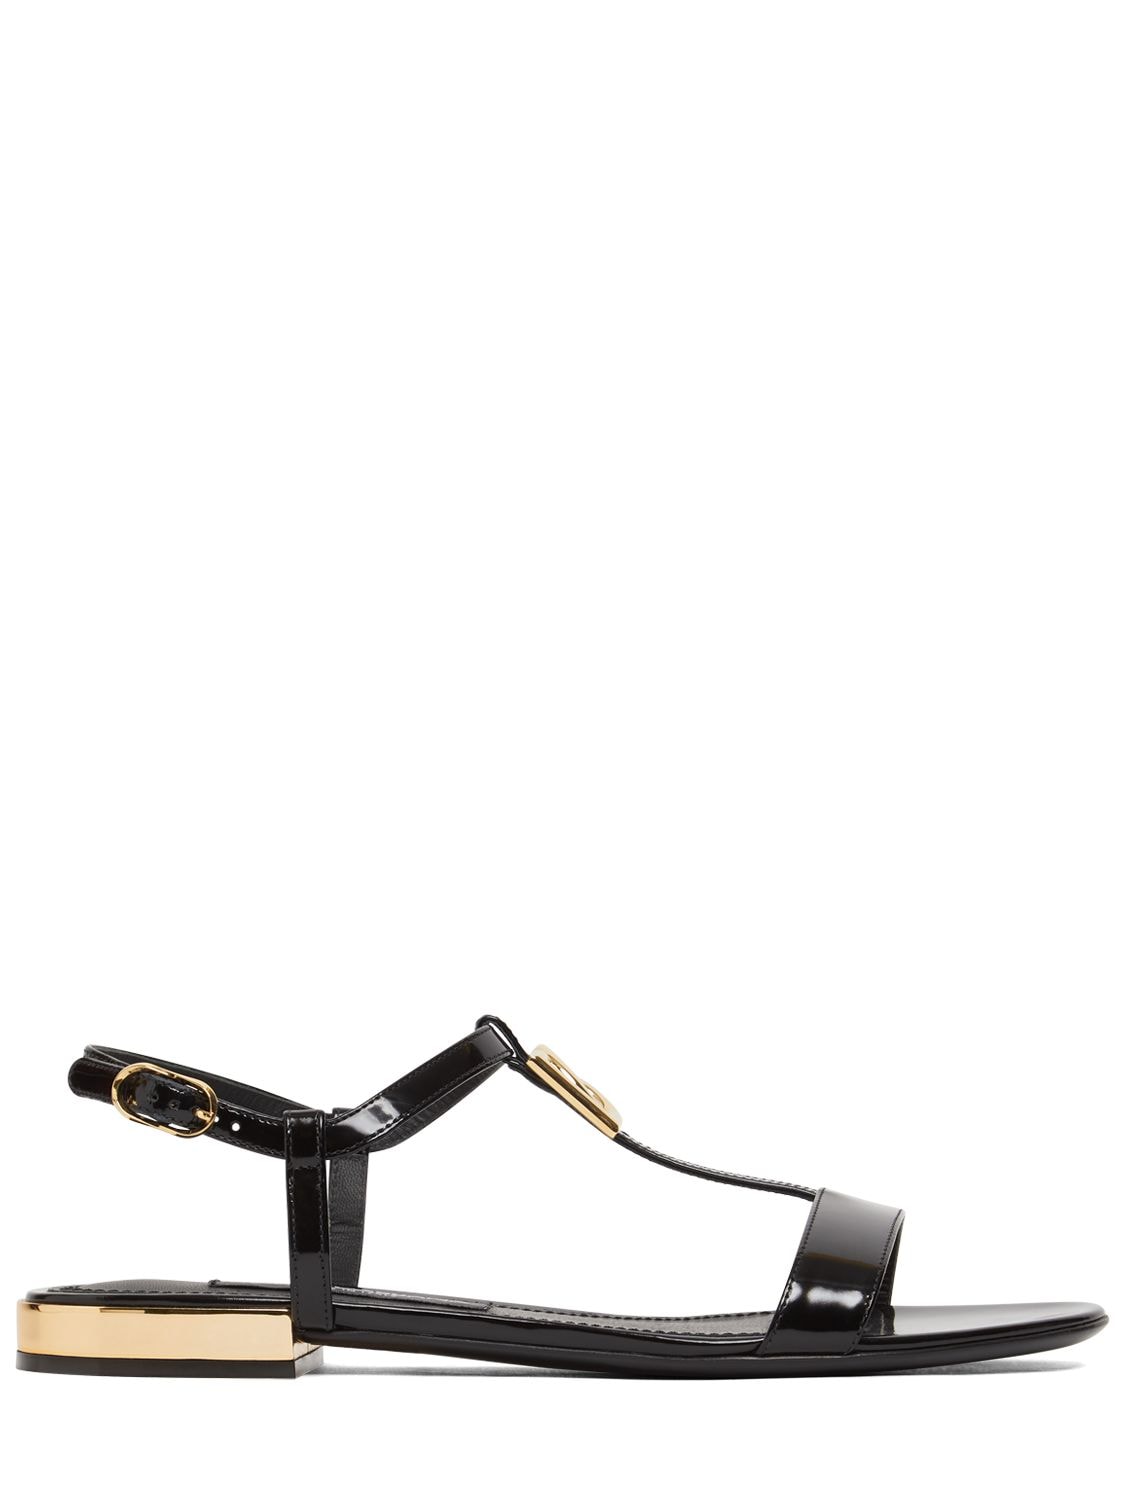 Dolce & Gabbana 10mm Patent Leather Logo Sandals In Black